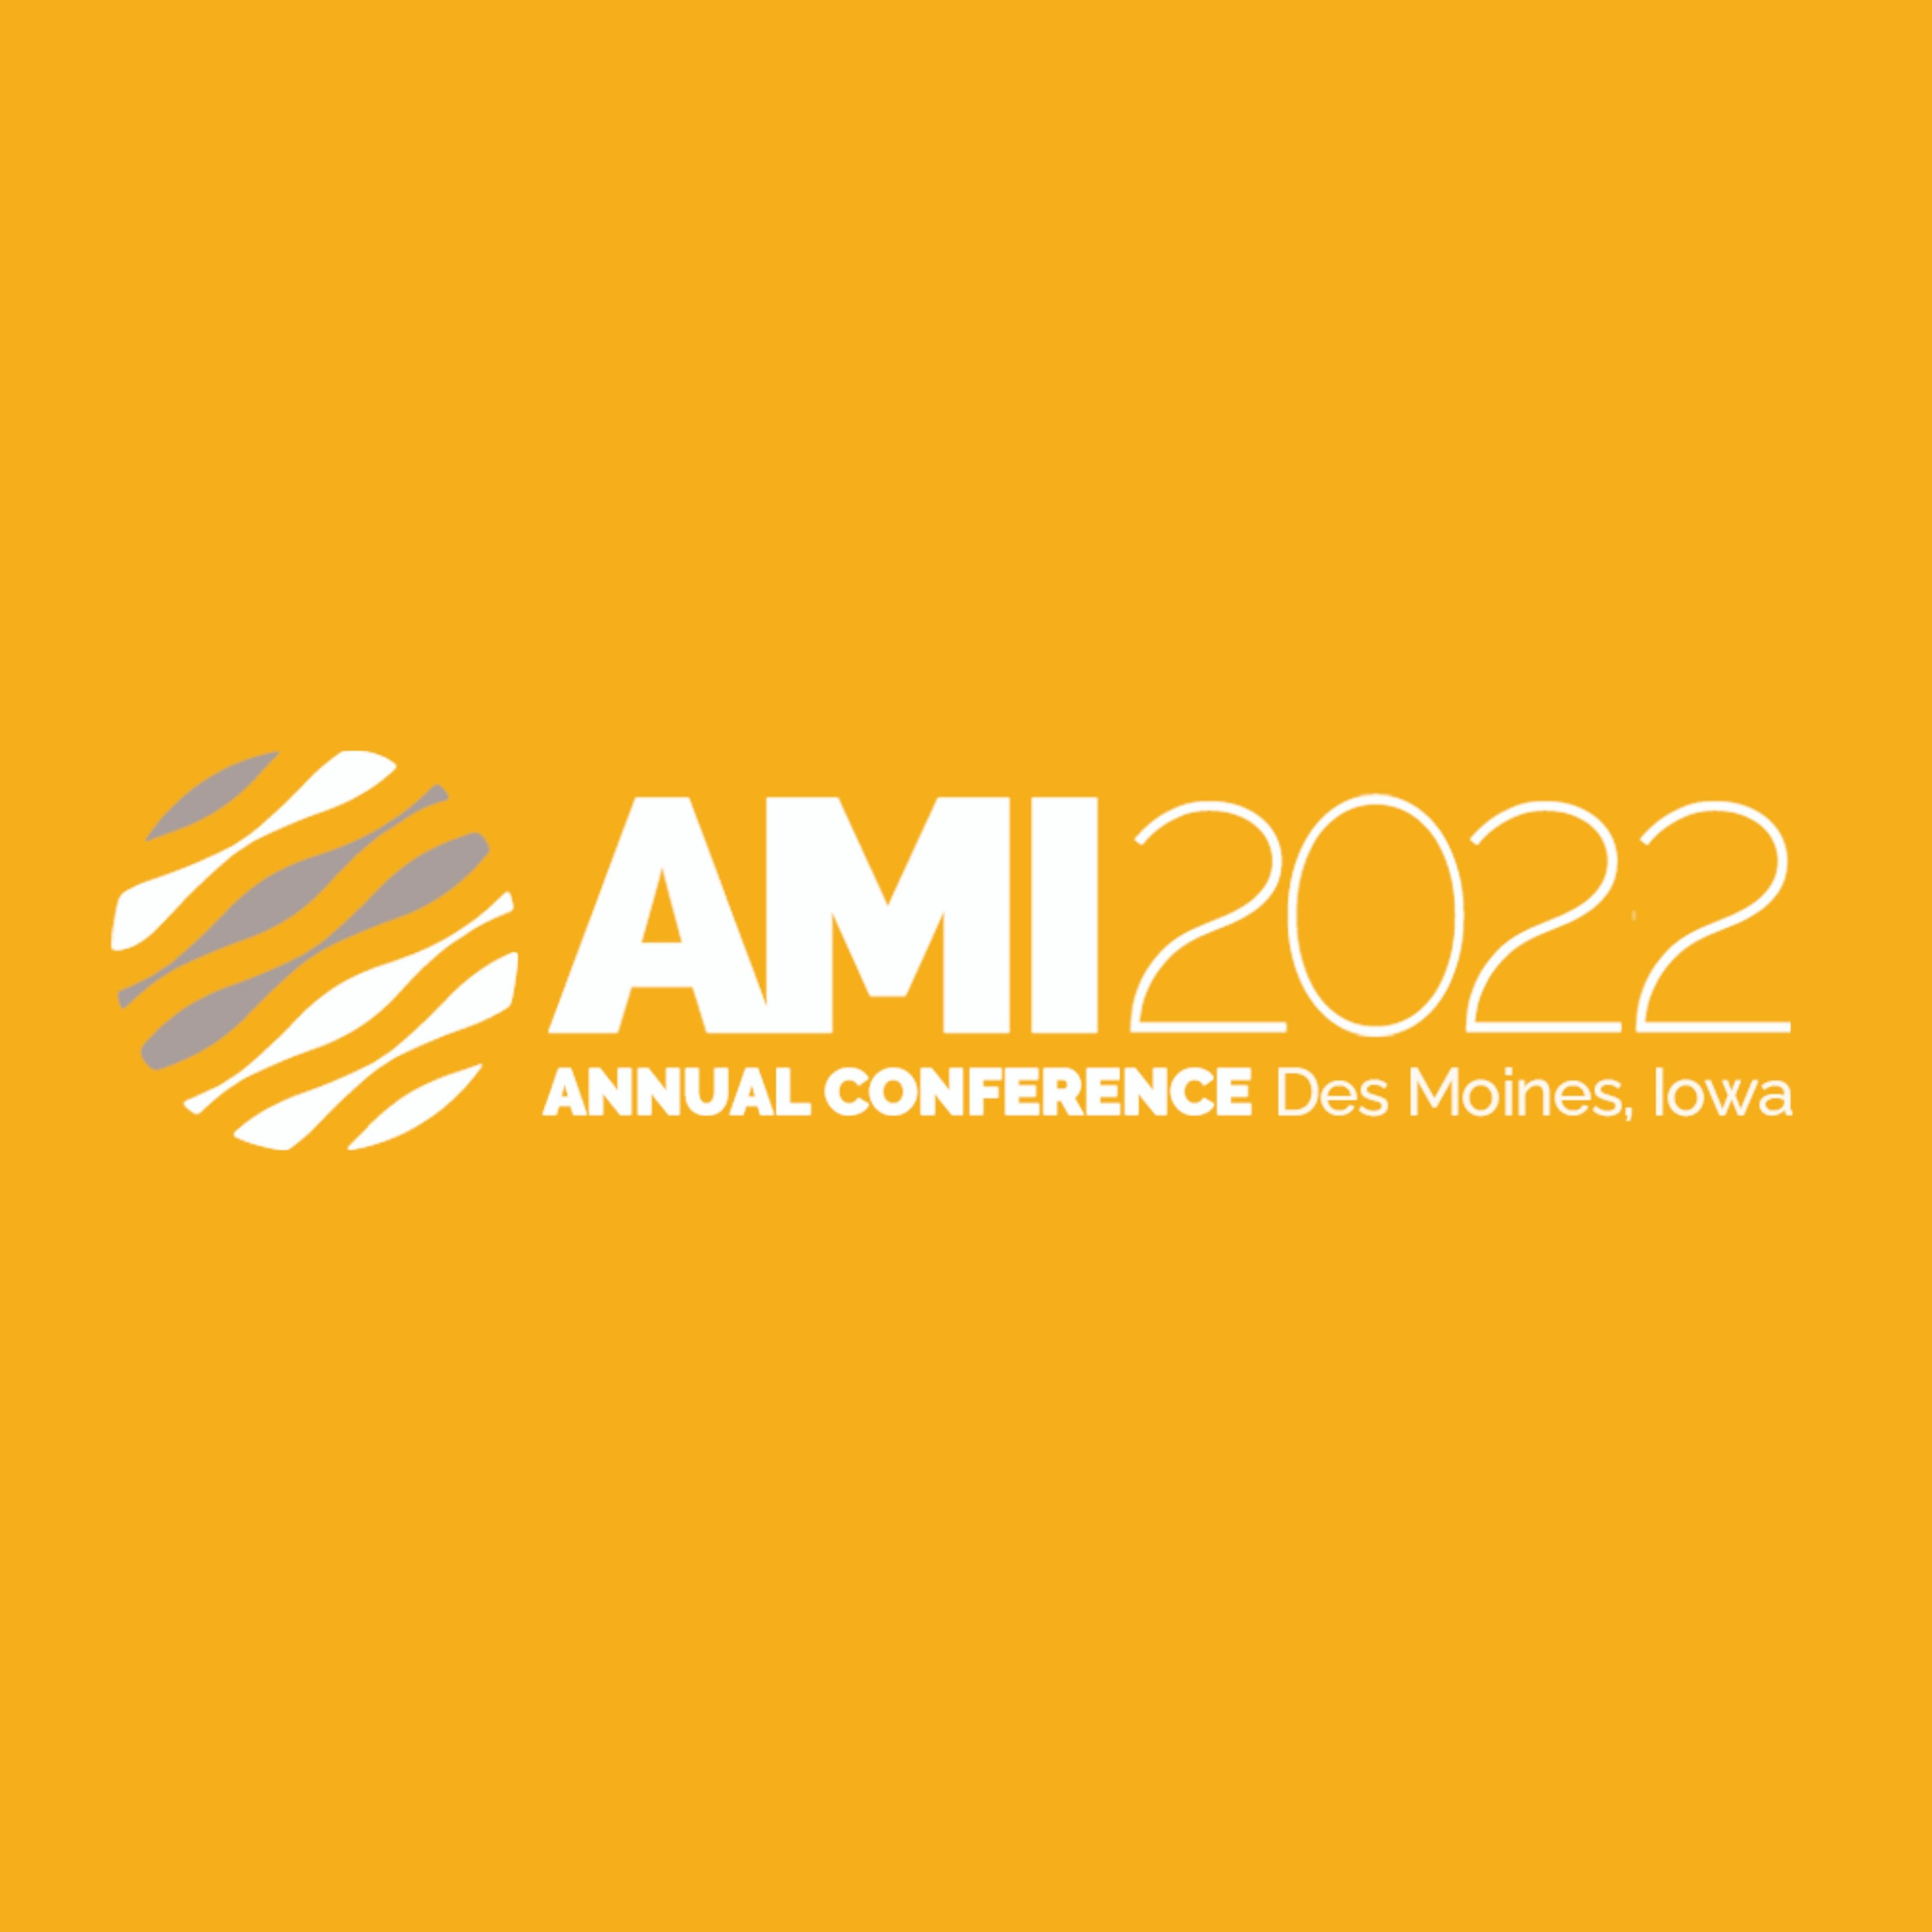 Report on AMI 2022 annual conference